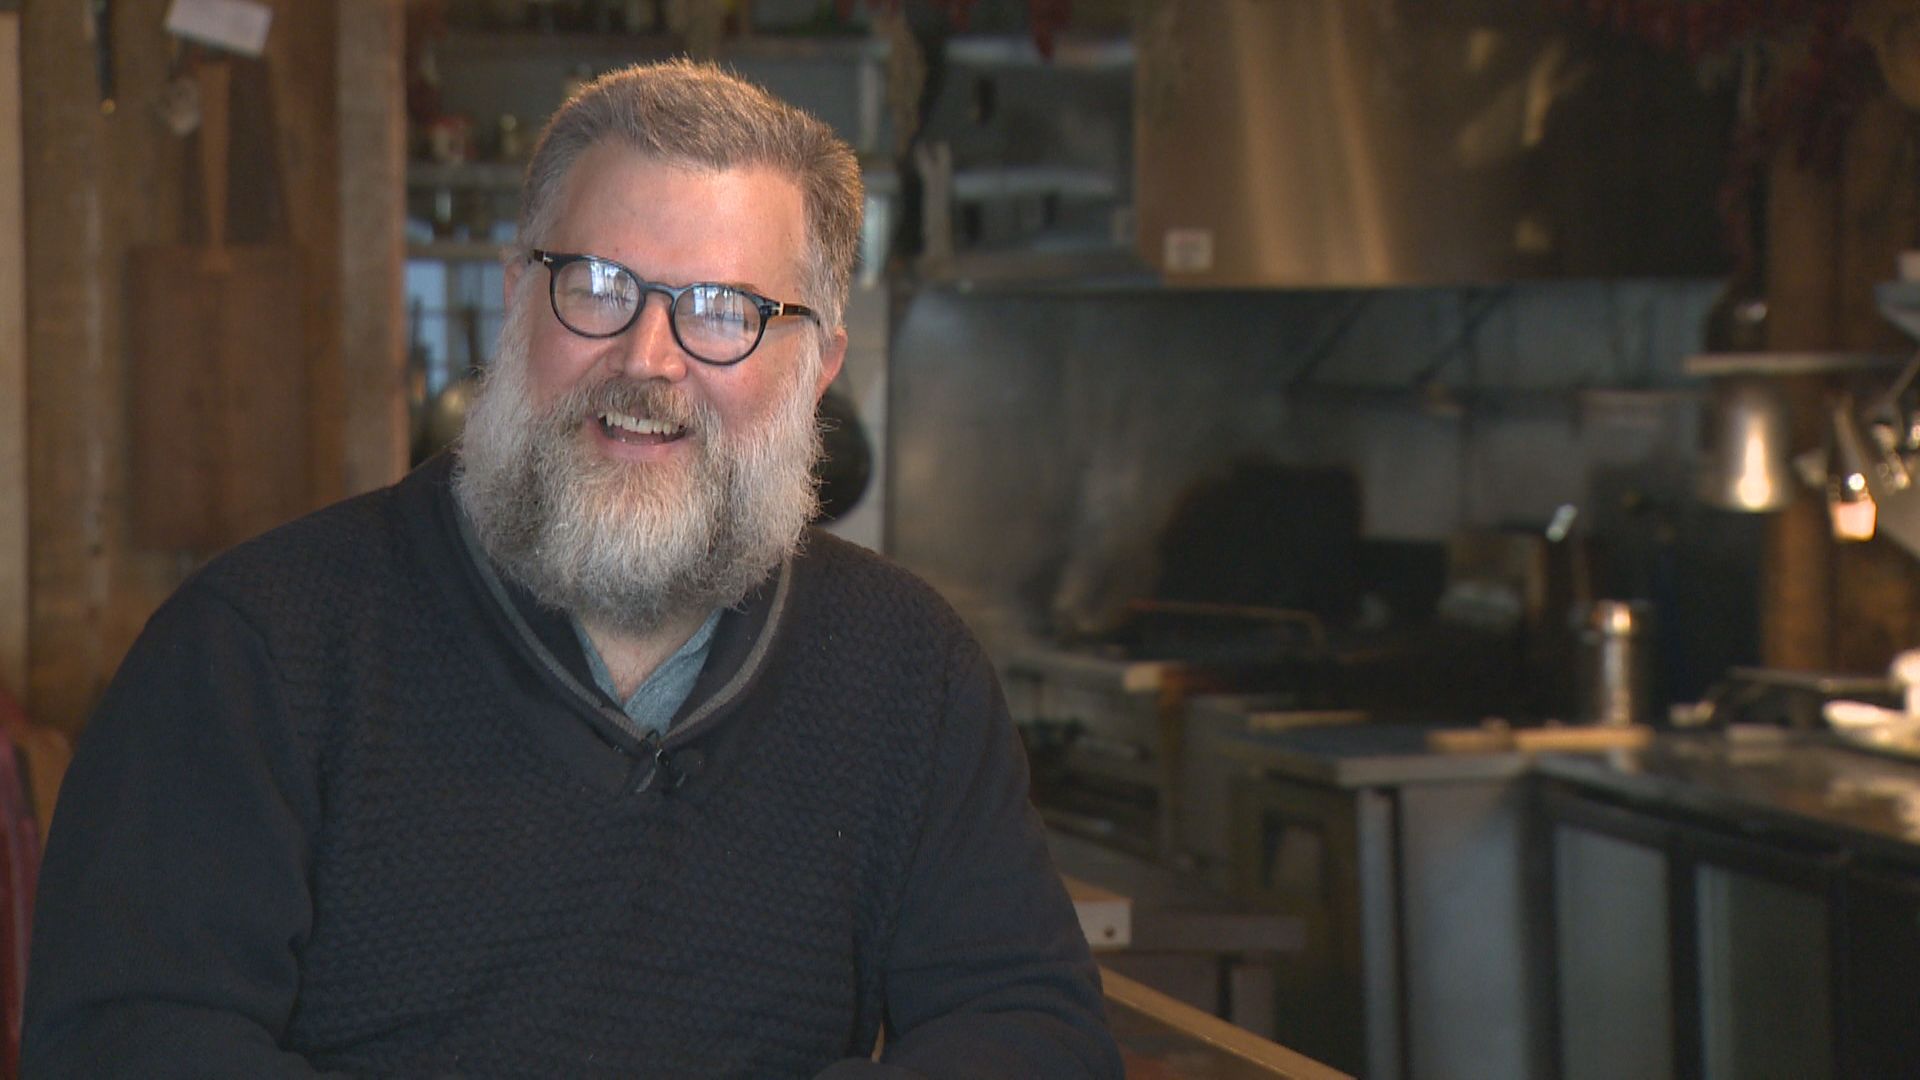 A Montrealer by choice, Restaurant Gus chef shows what out-of-province students can contribute